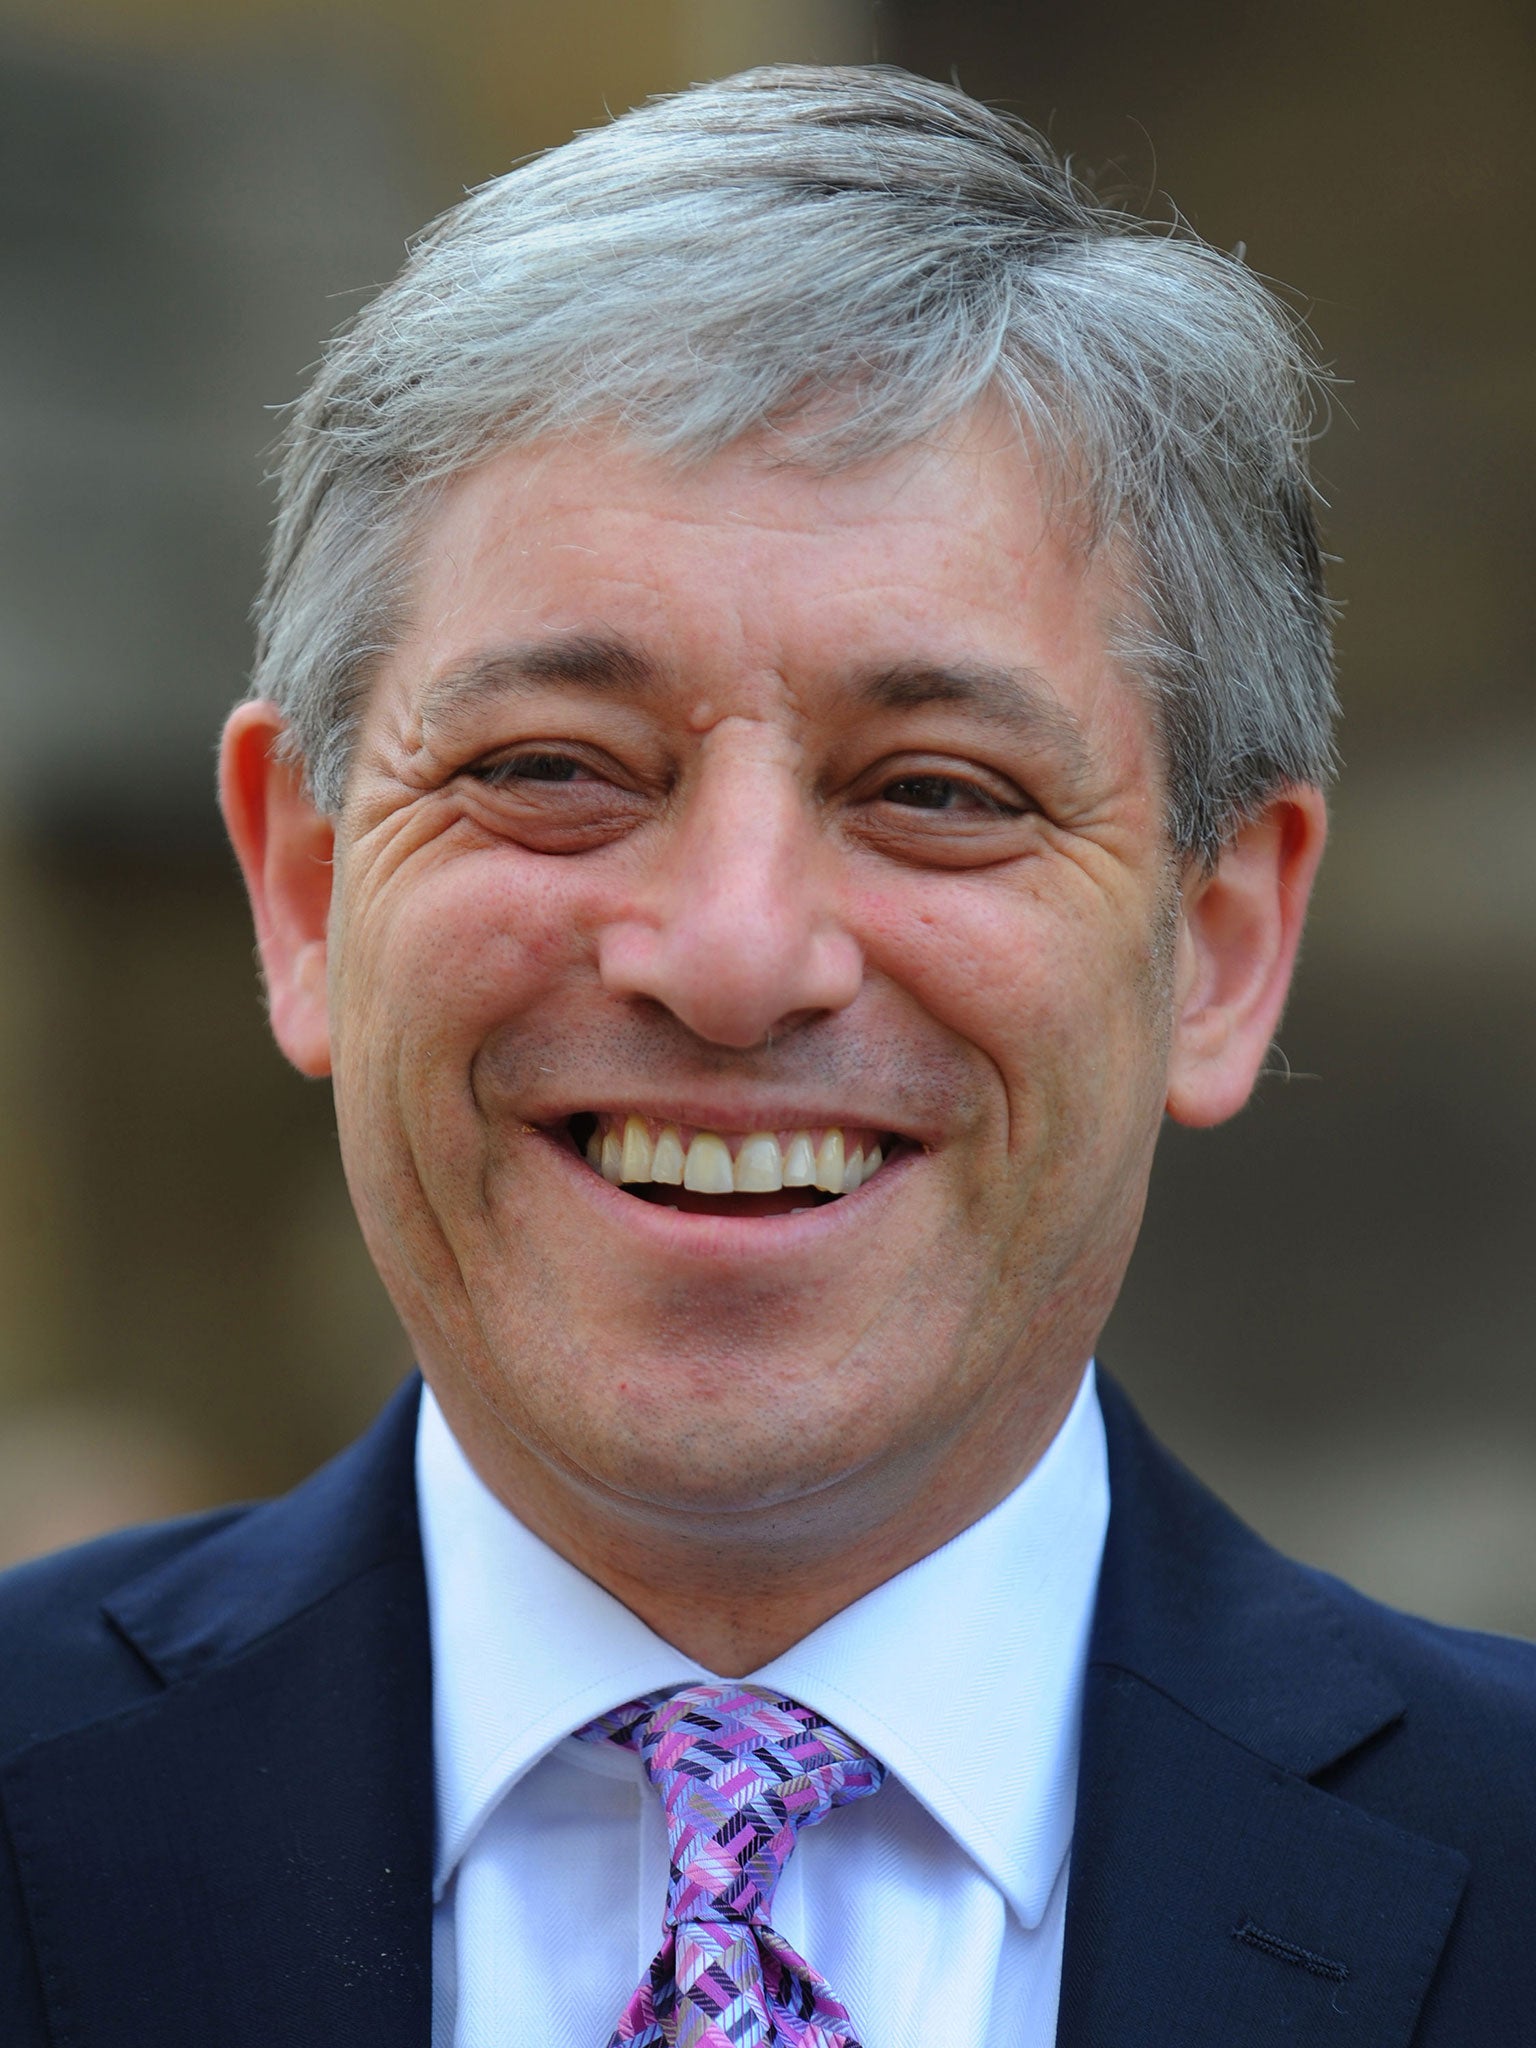 A commission set up by Commons Speaker John Bercow has said that people should be able to cast their vote online in the 2020 general election and question MPs through an internet forum